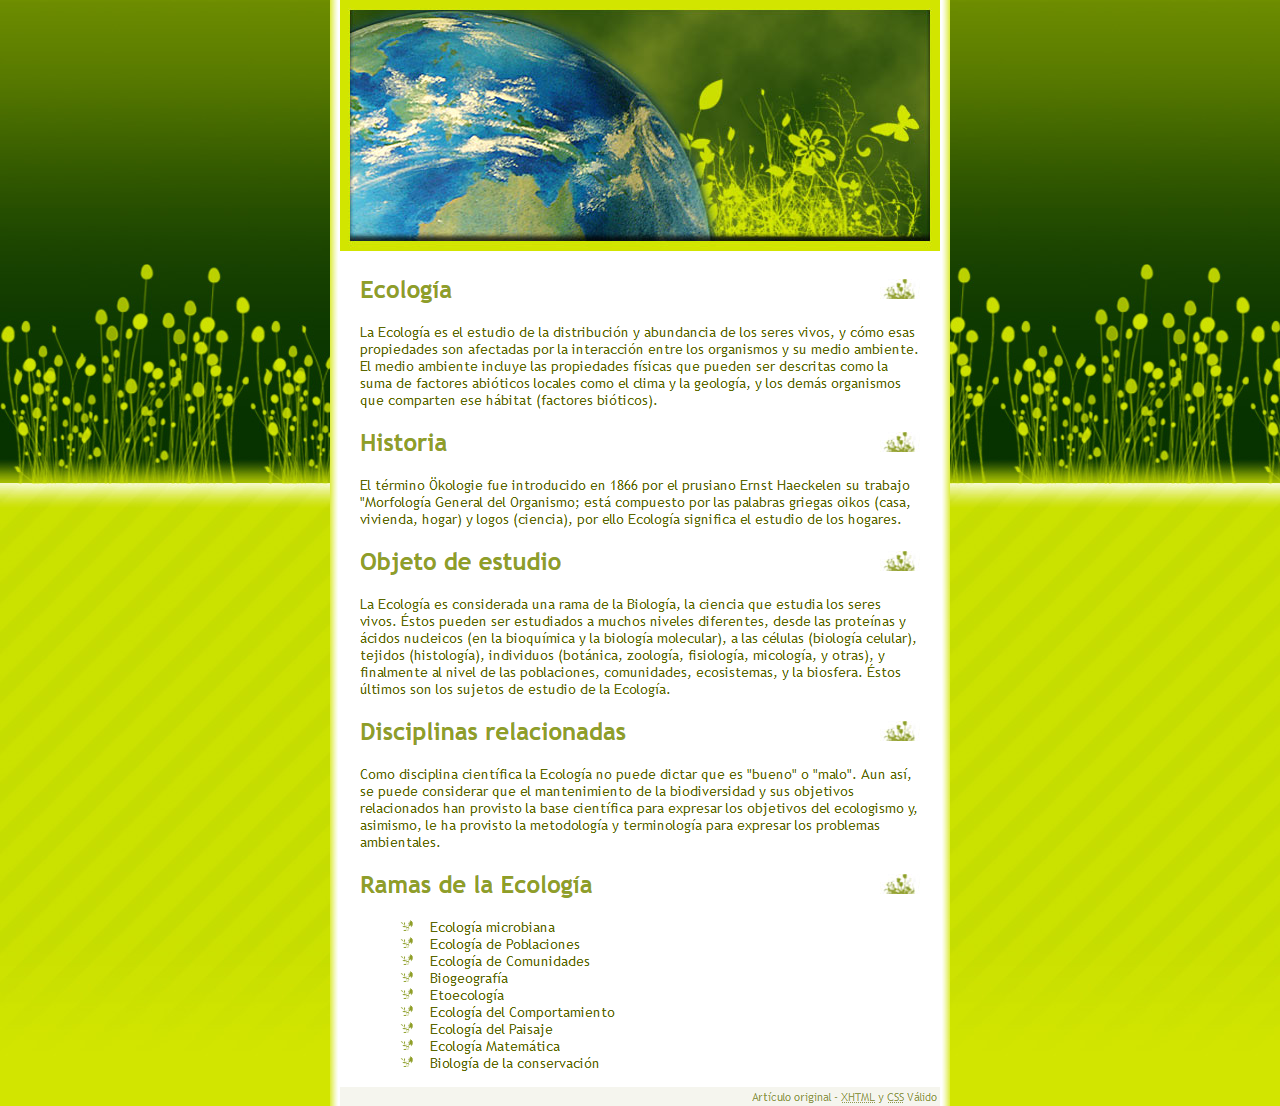 Competencia Xhtml + Css - Forosdelweb - Xhtml 1.0 Strict, Css, Accesibilidad, Photoshop. Año 2007